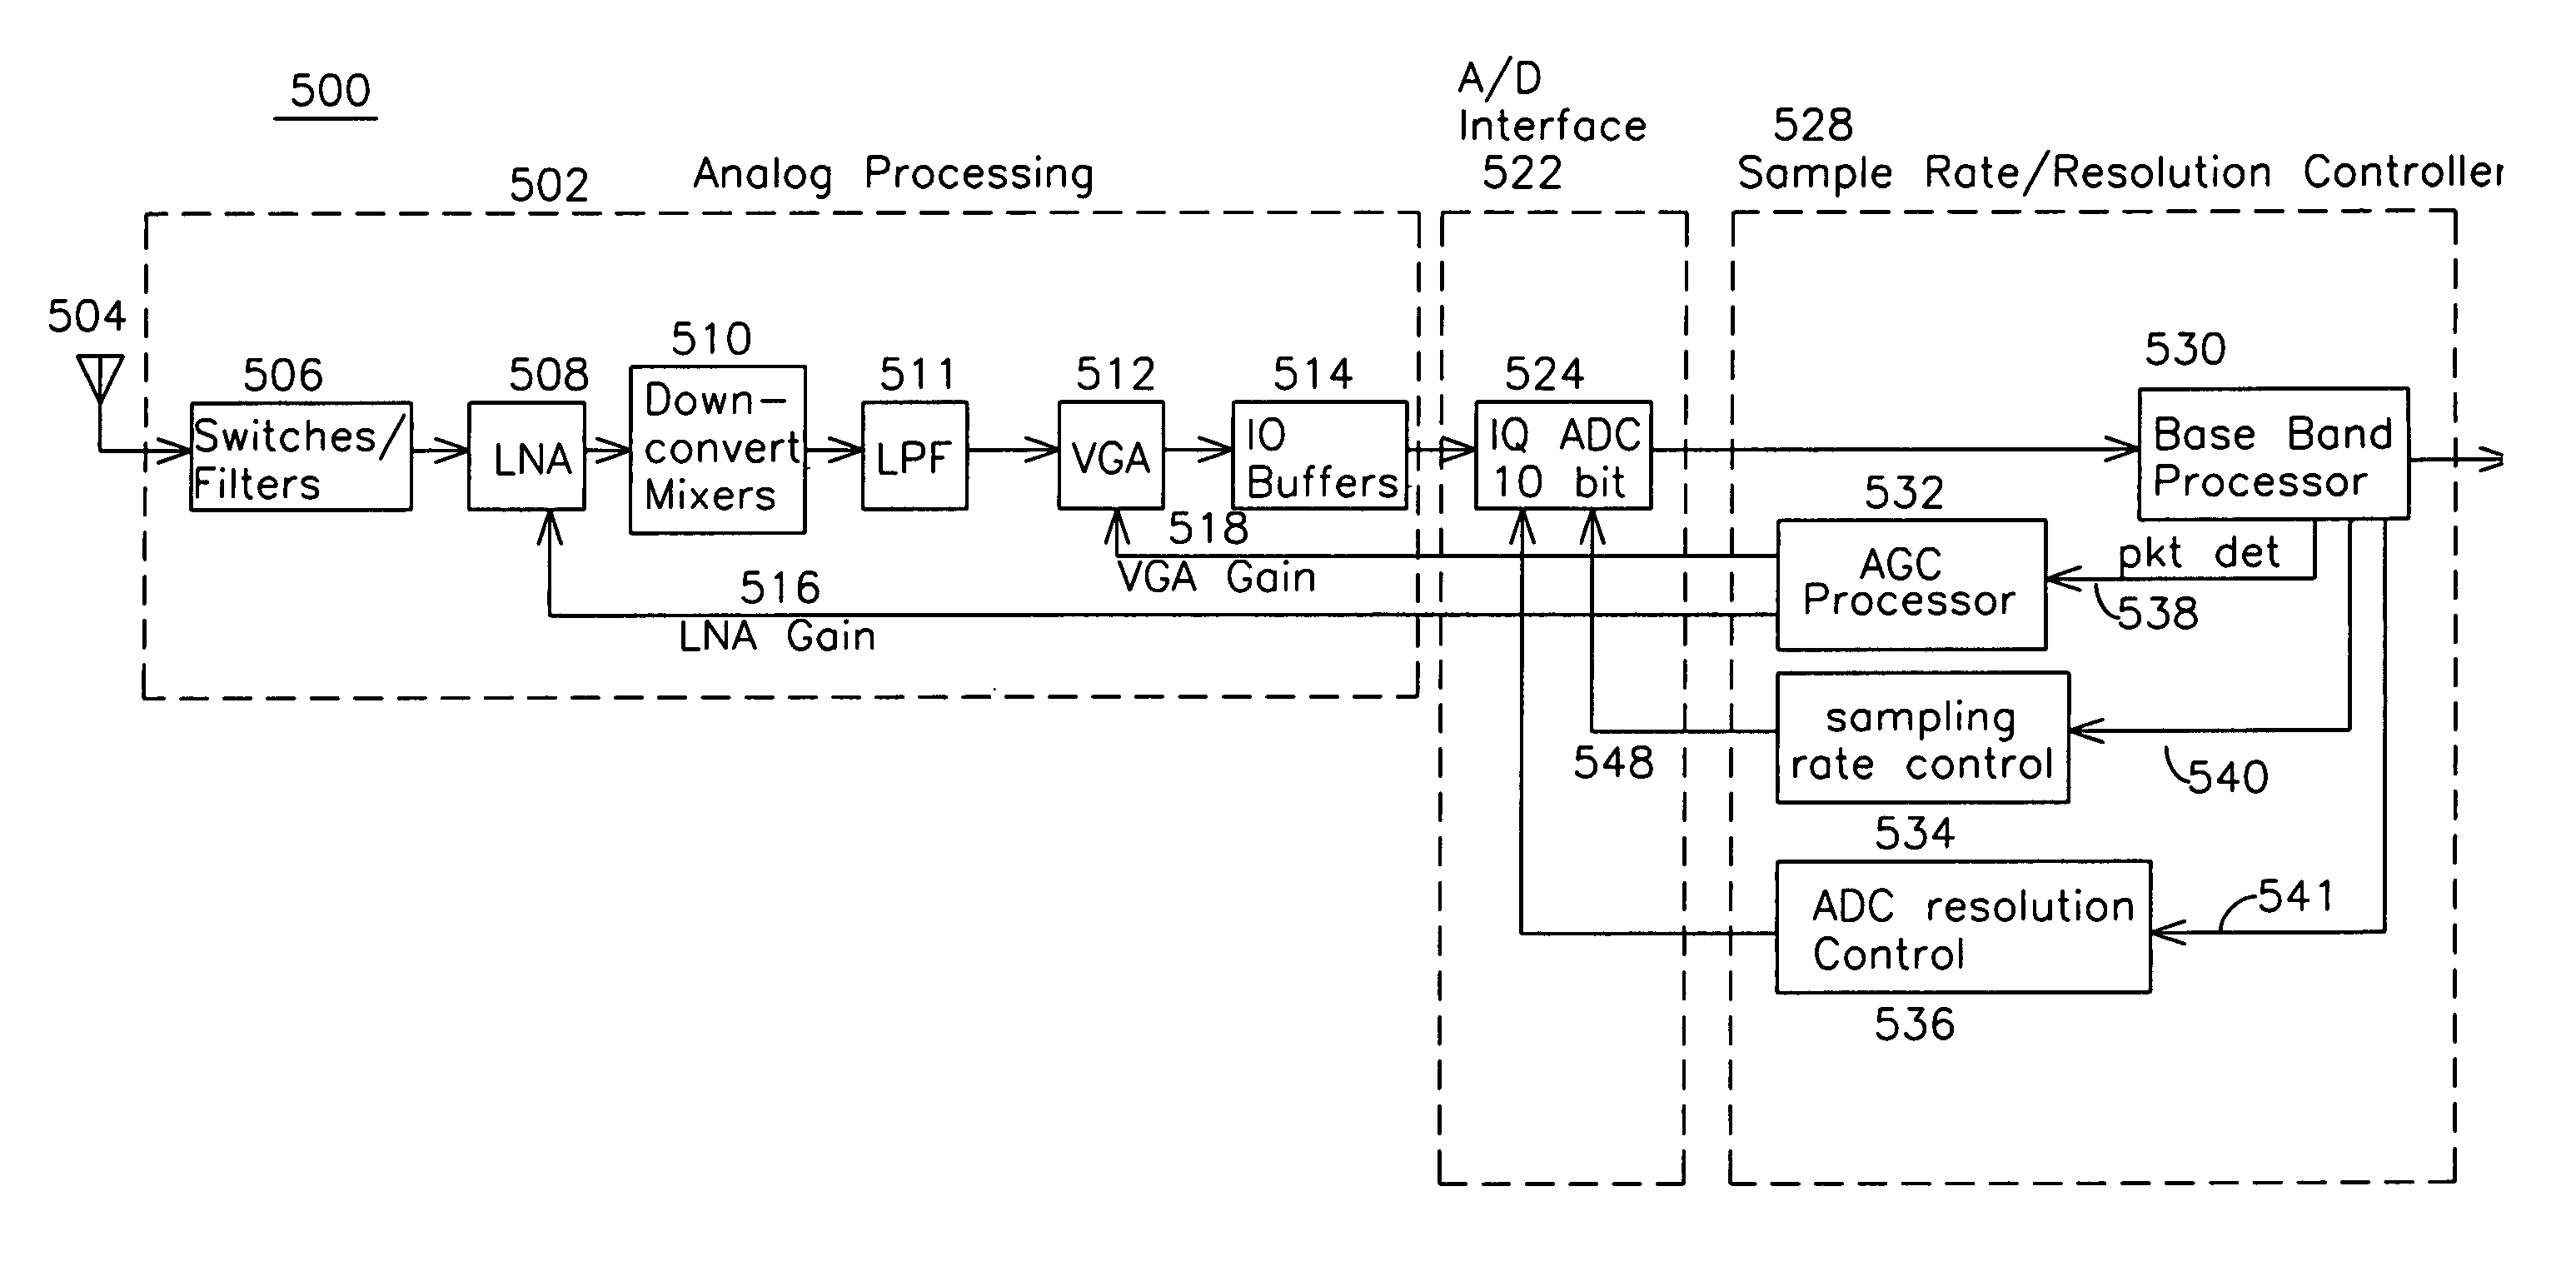 Apparatus for a wireless communications system using signal energy to control sample resolution and rate